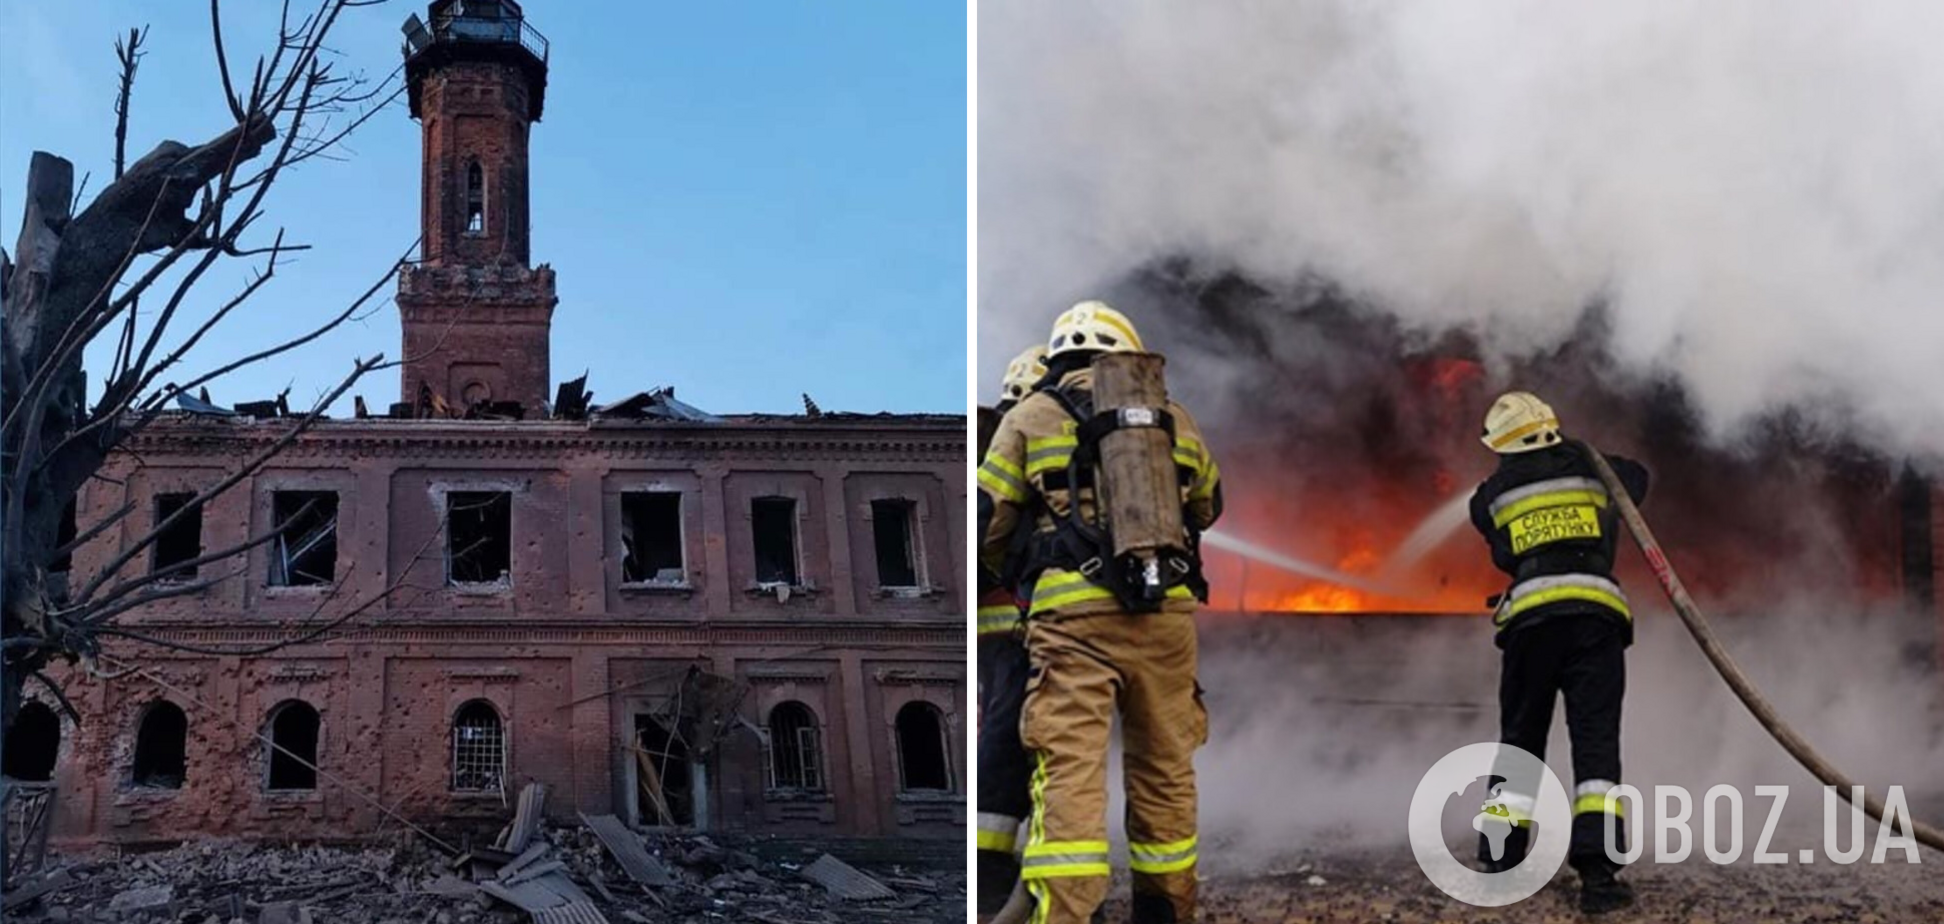 Russian invaders destroyed historic building in Kharkiv. Photo